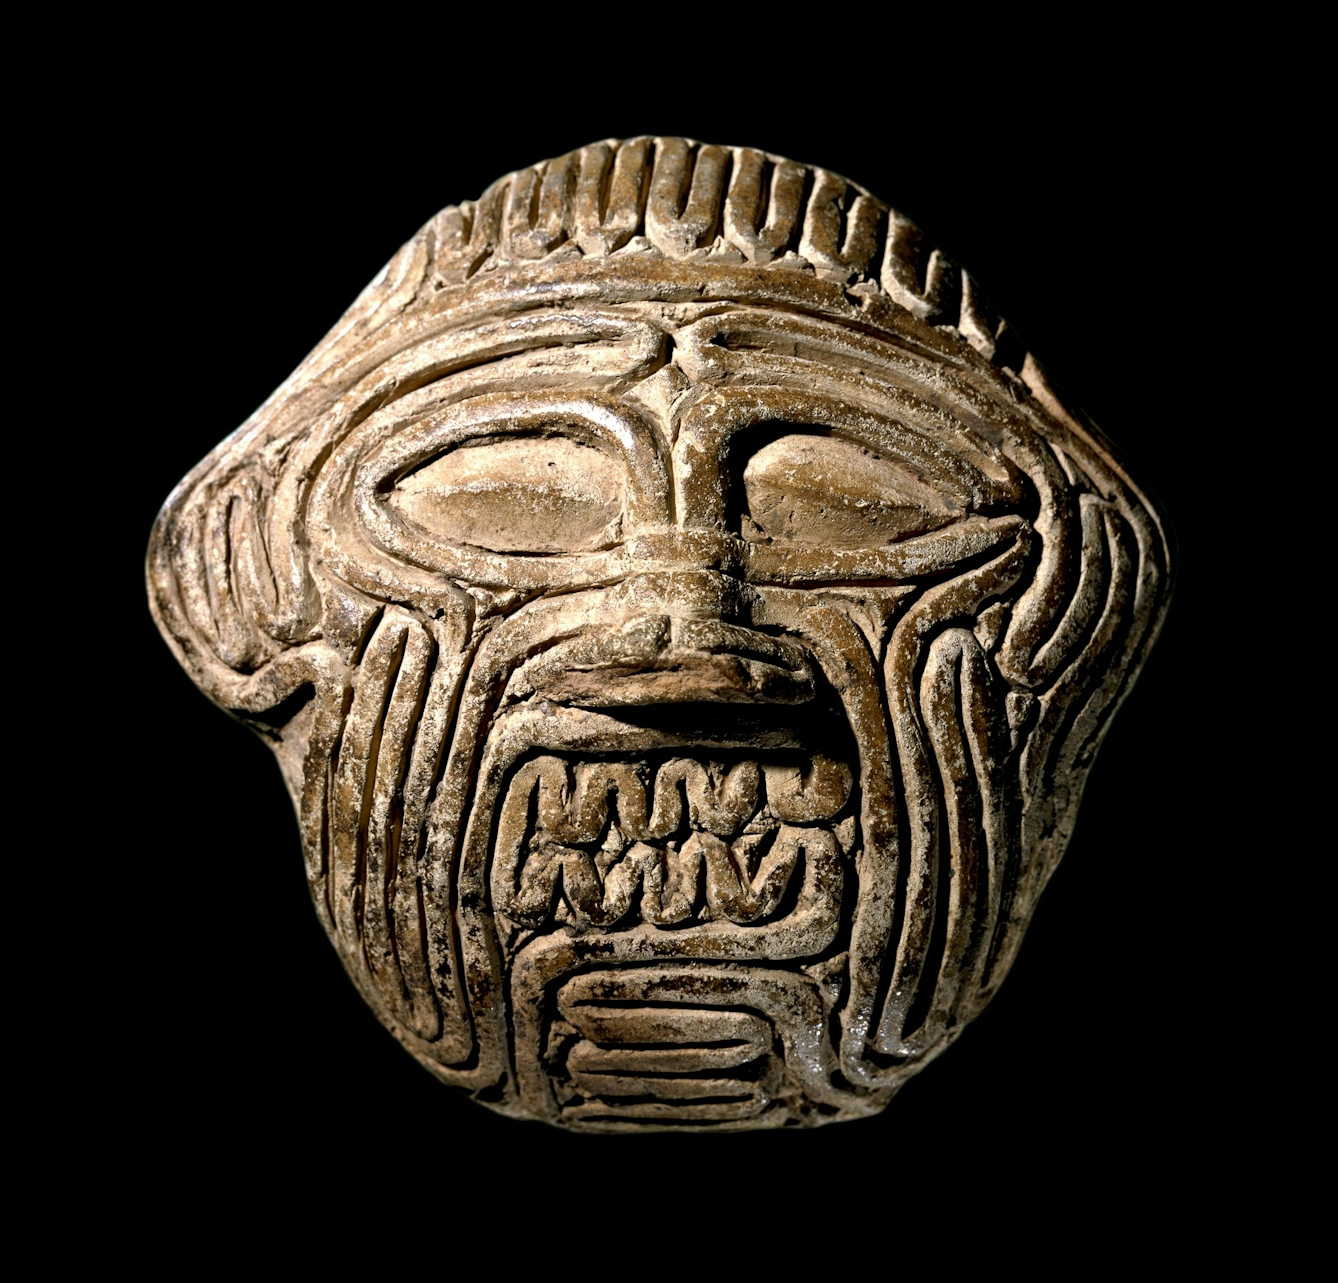 An ancient Babylonian clay mask showing the face of the demon Humbaba.